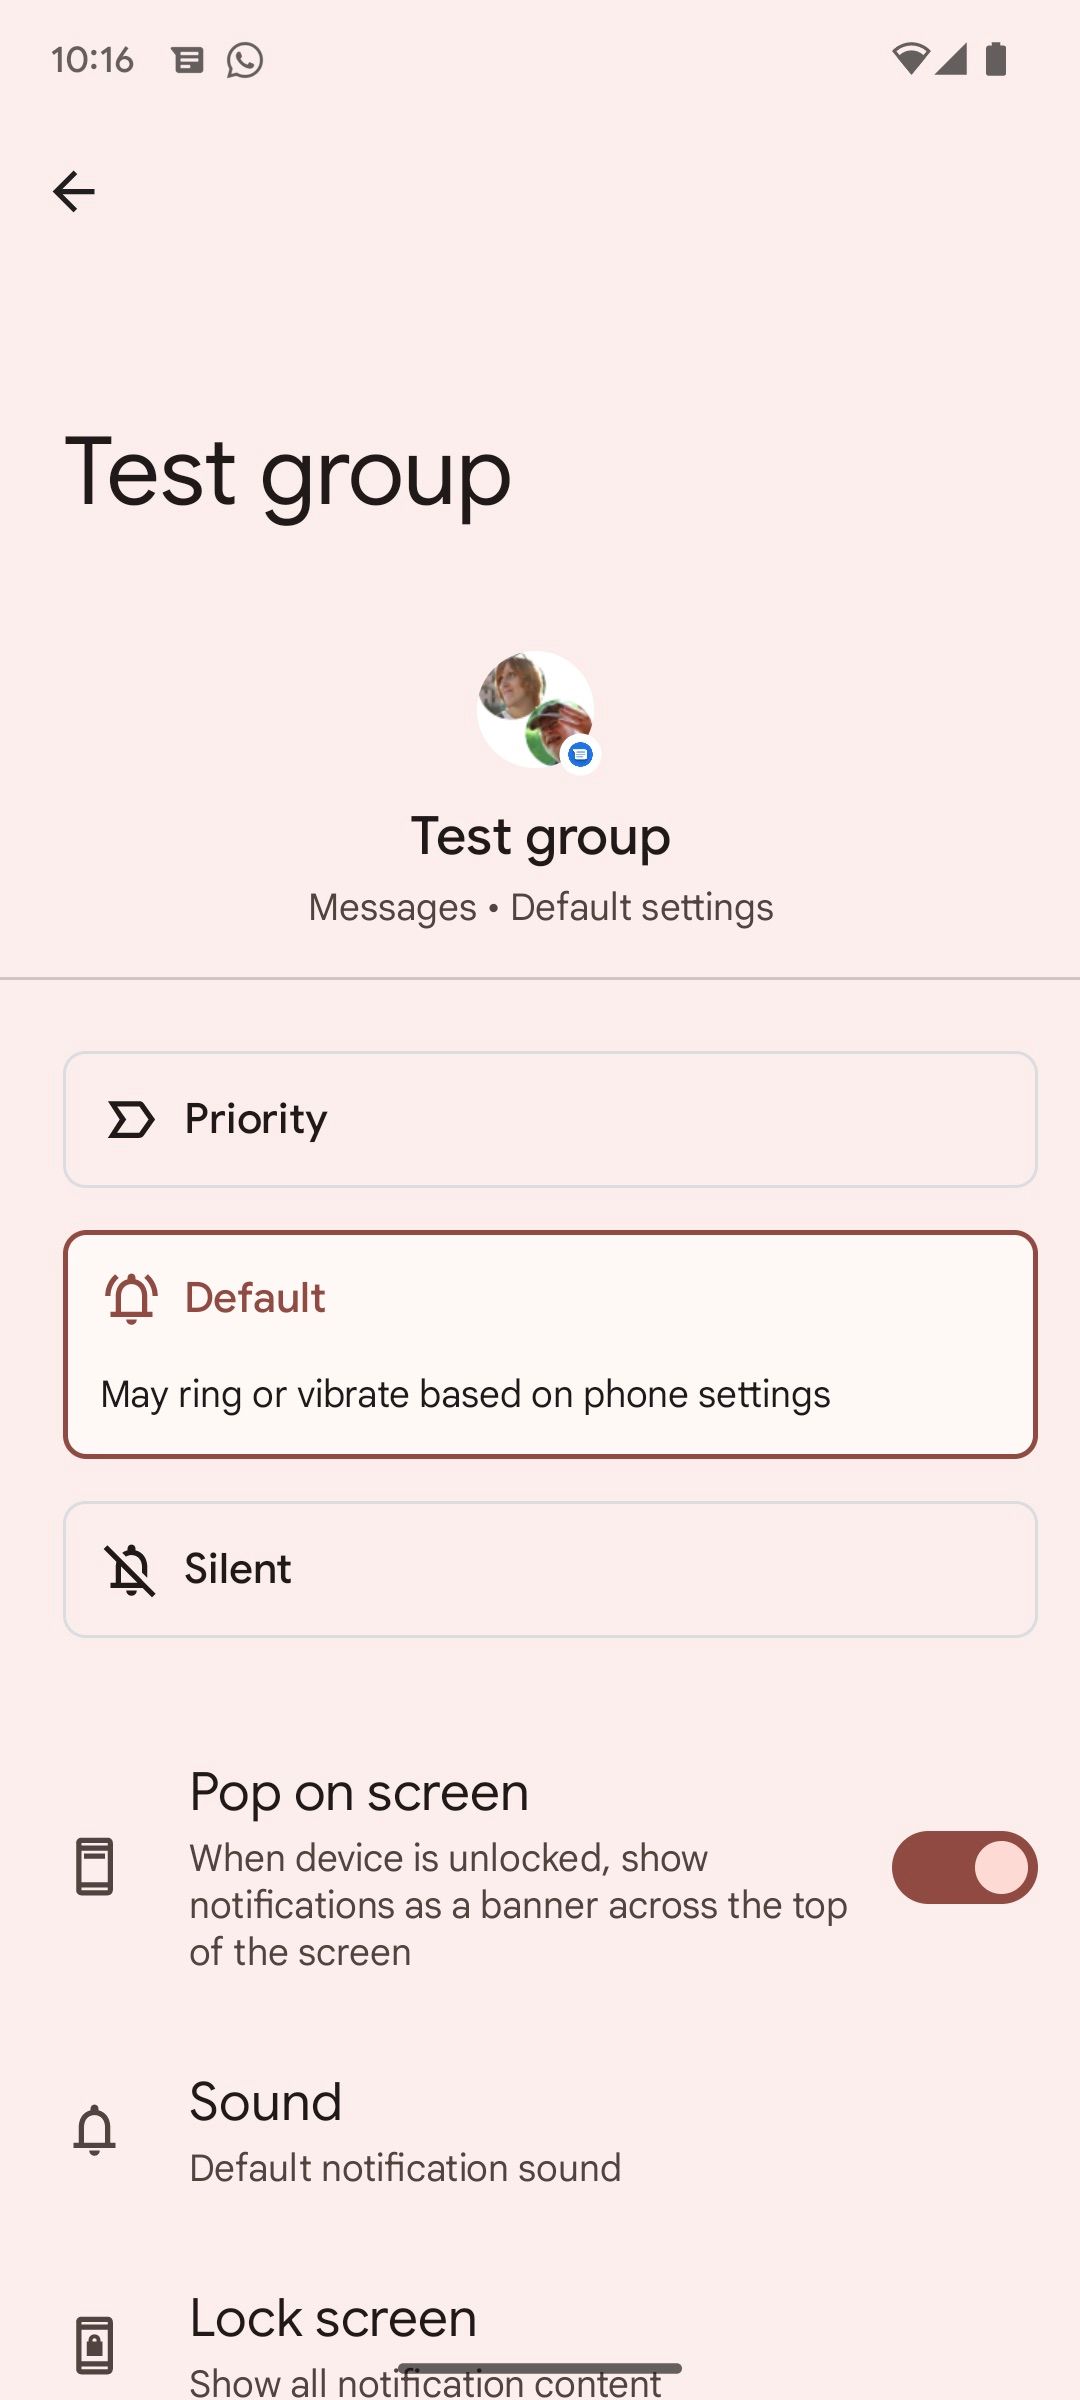 Group chat settings in Google Messages